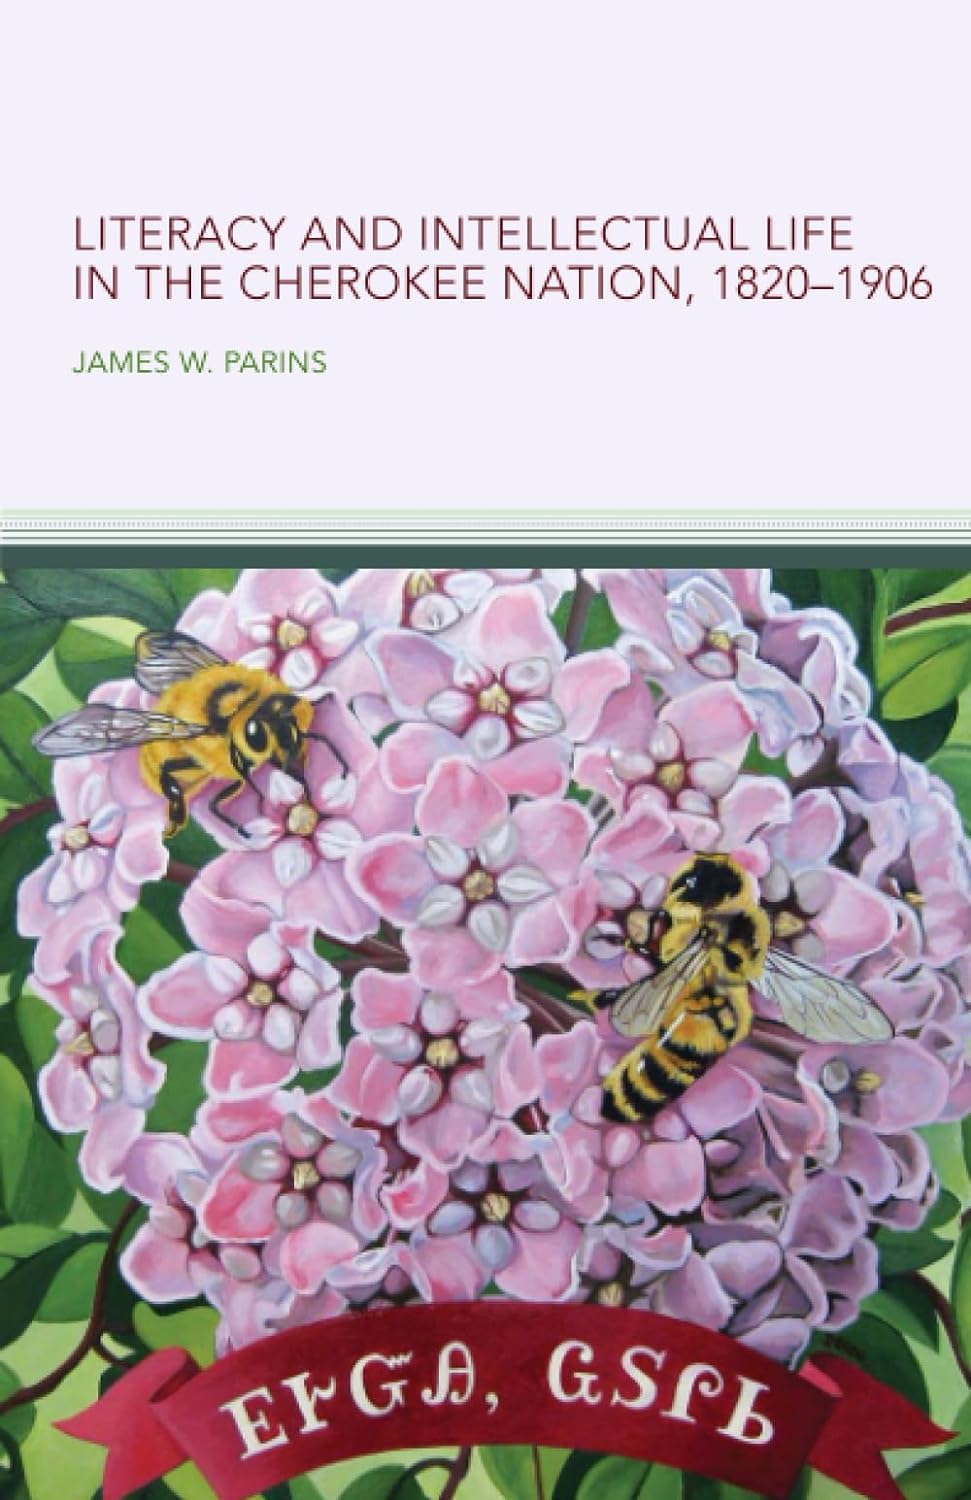 Literacy and Intellectual Life in the Cherokee Nation, 1820 - 1906 by James W. Parins